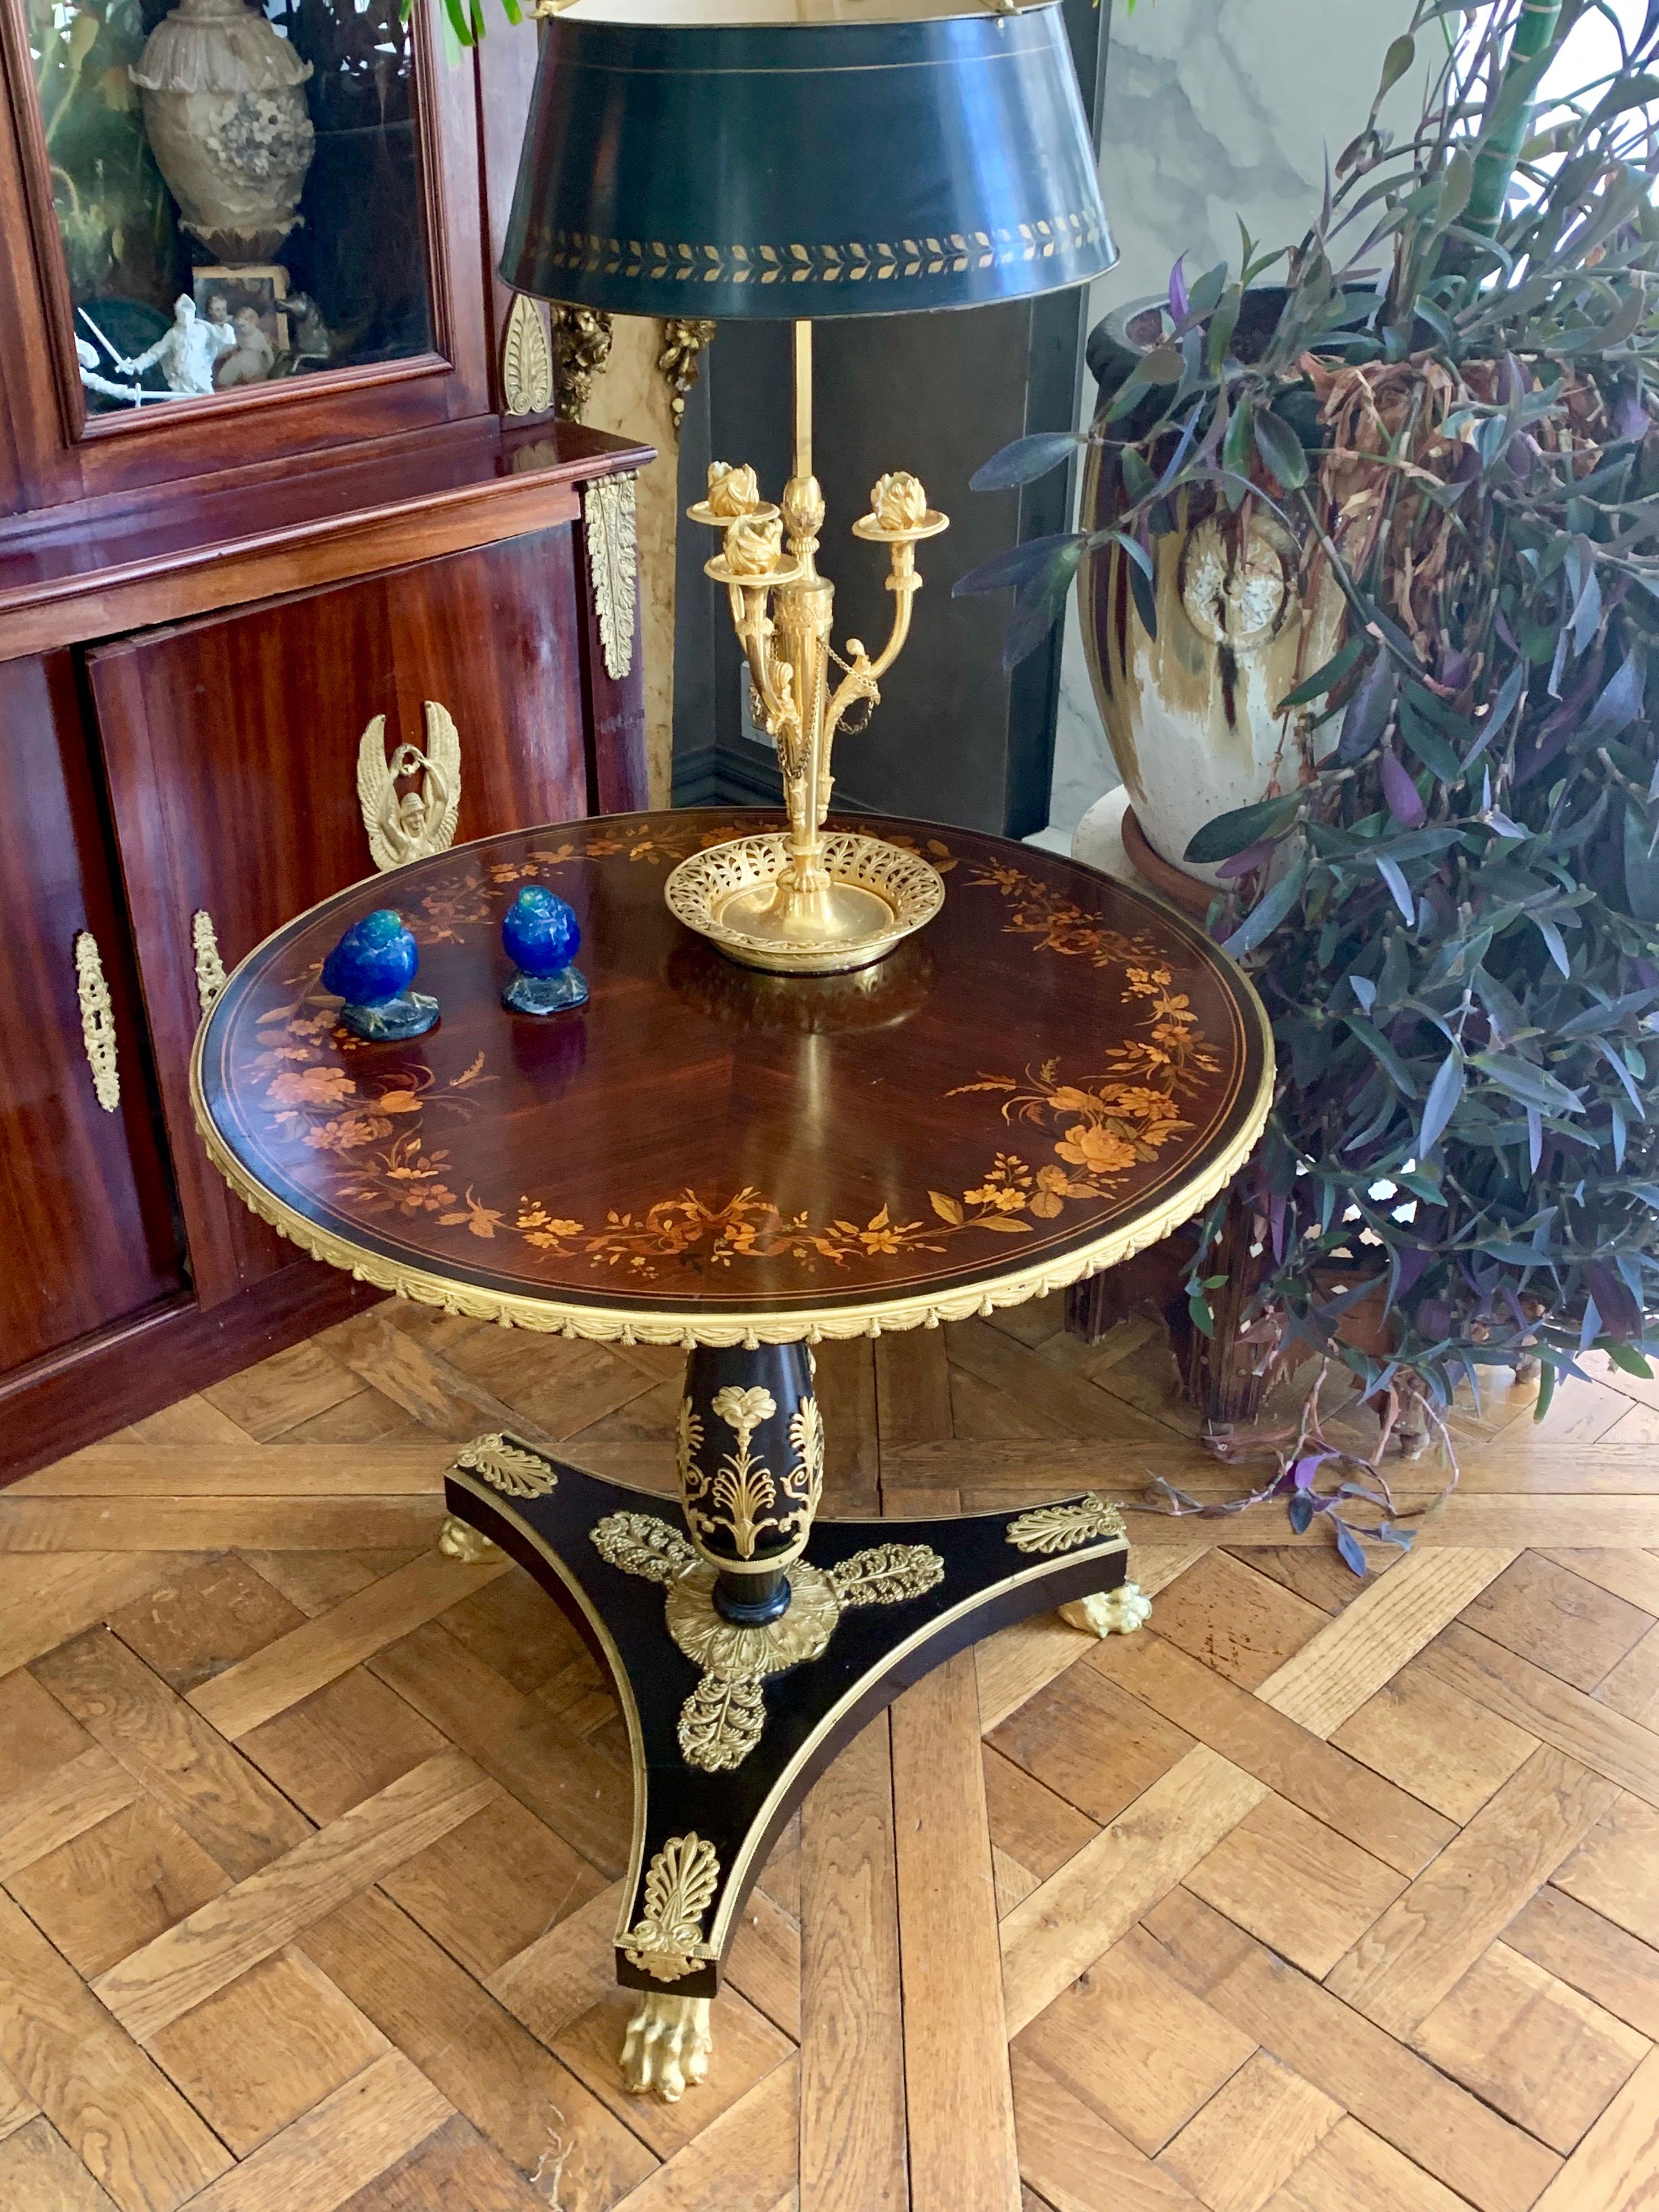 A fine example of Herts Brother's high quality craftsmanship. This round side table is raised on three hairy paw ormolu feet which has a heavily ormolu encrusted platform out of which a column rises to support the finely inlaid top of flower